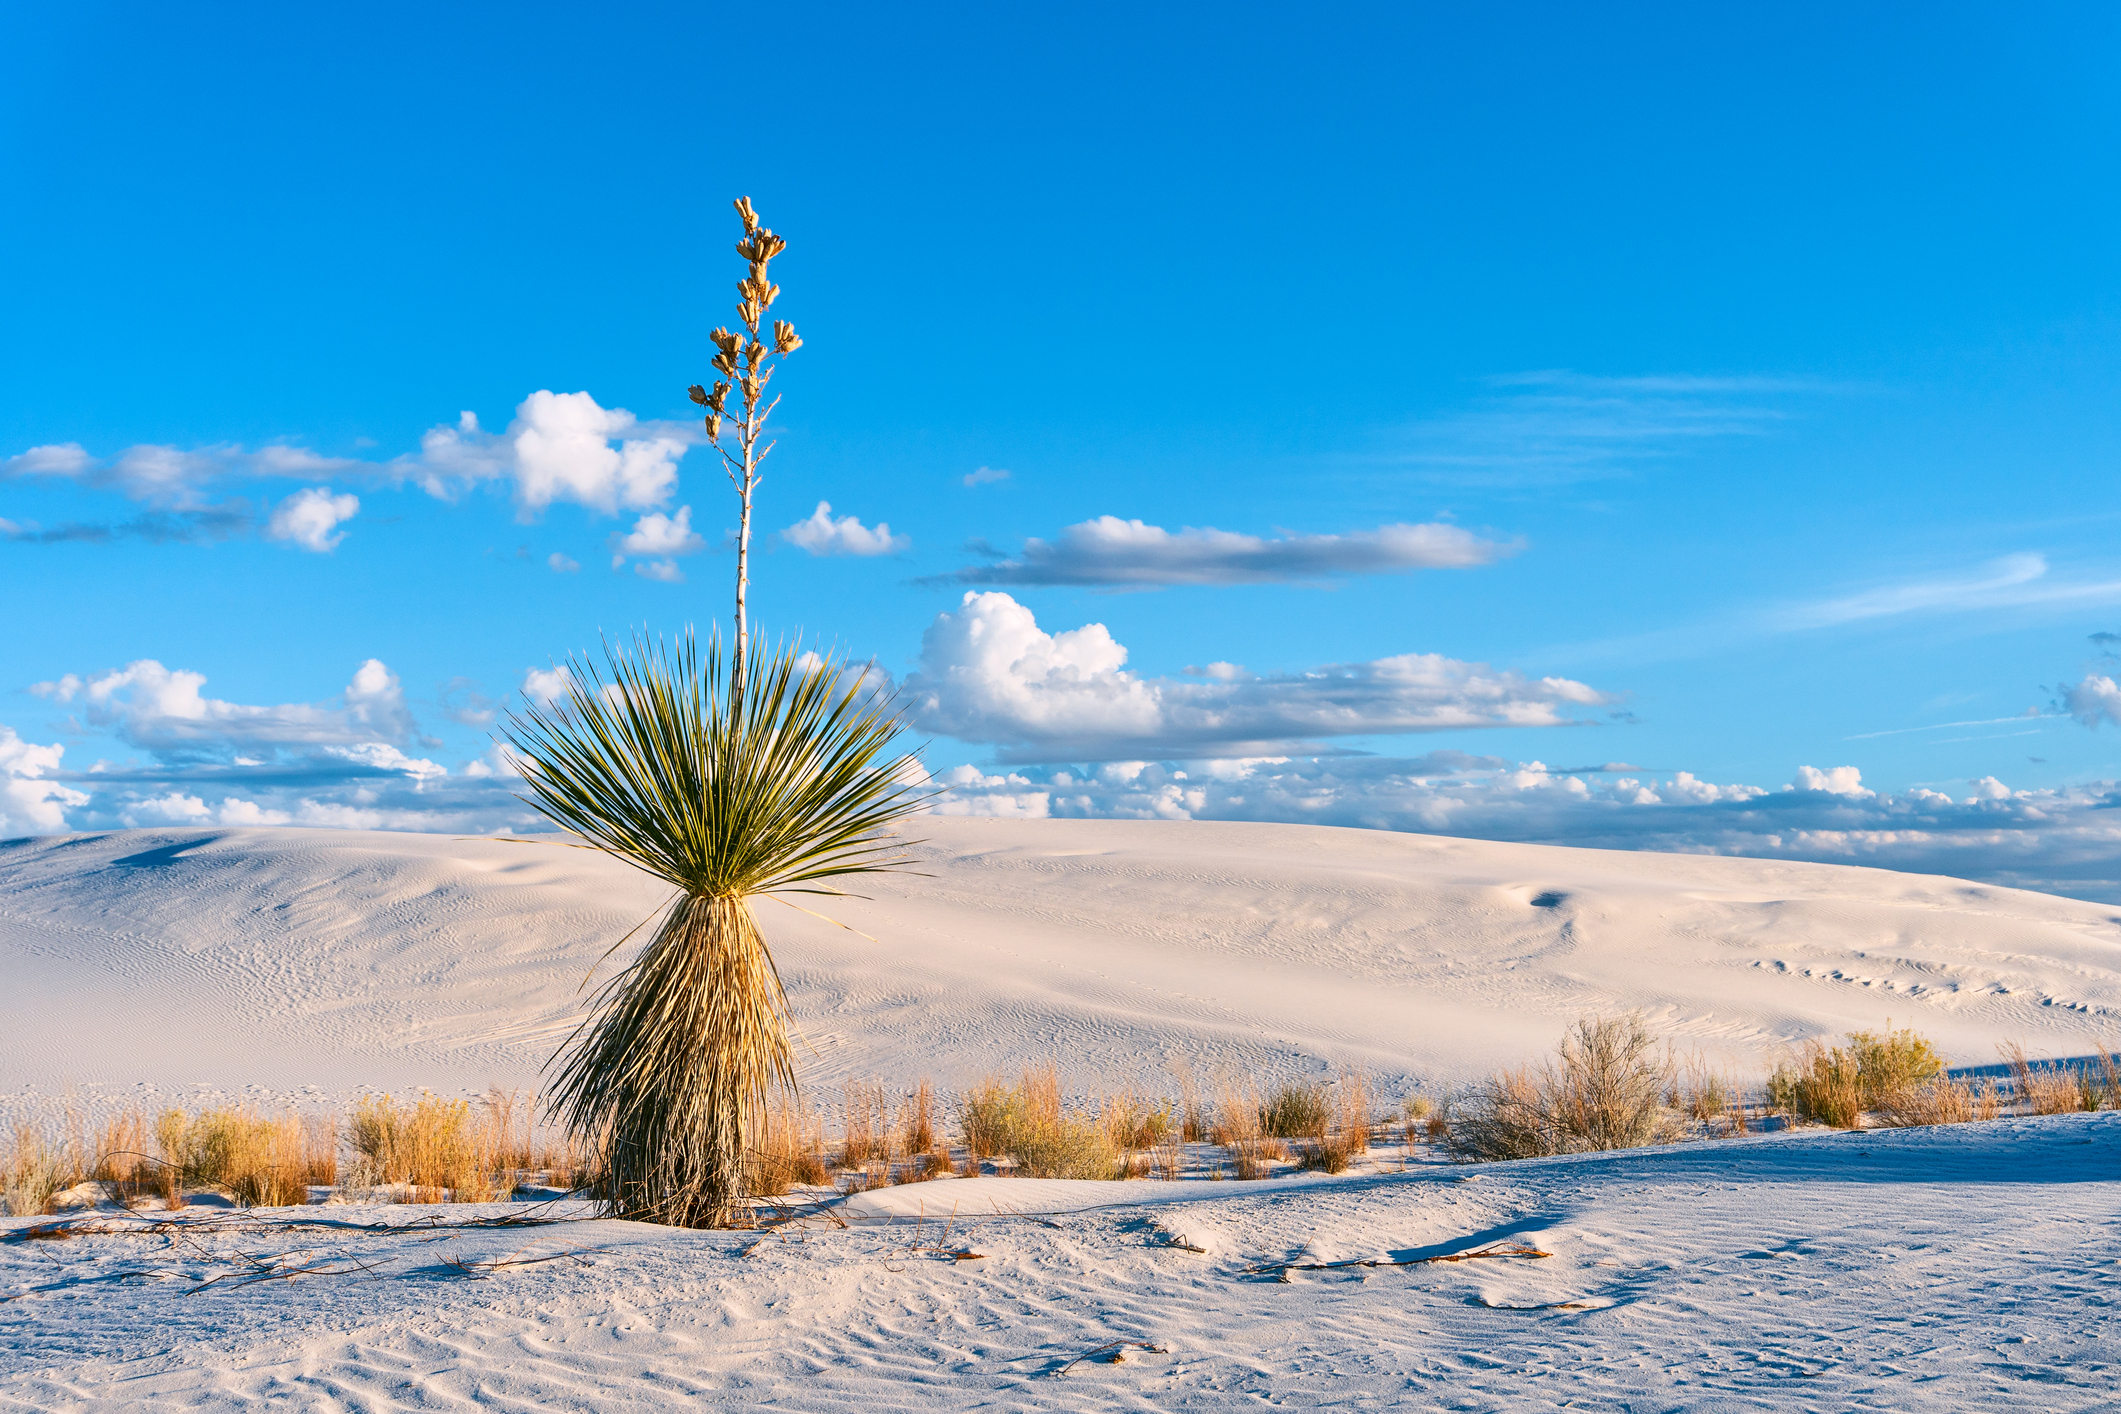 soaptree yucca plant at white sands national park